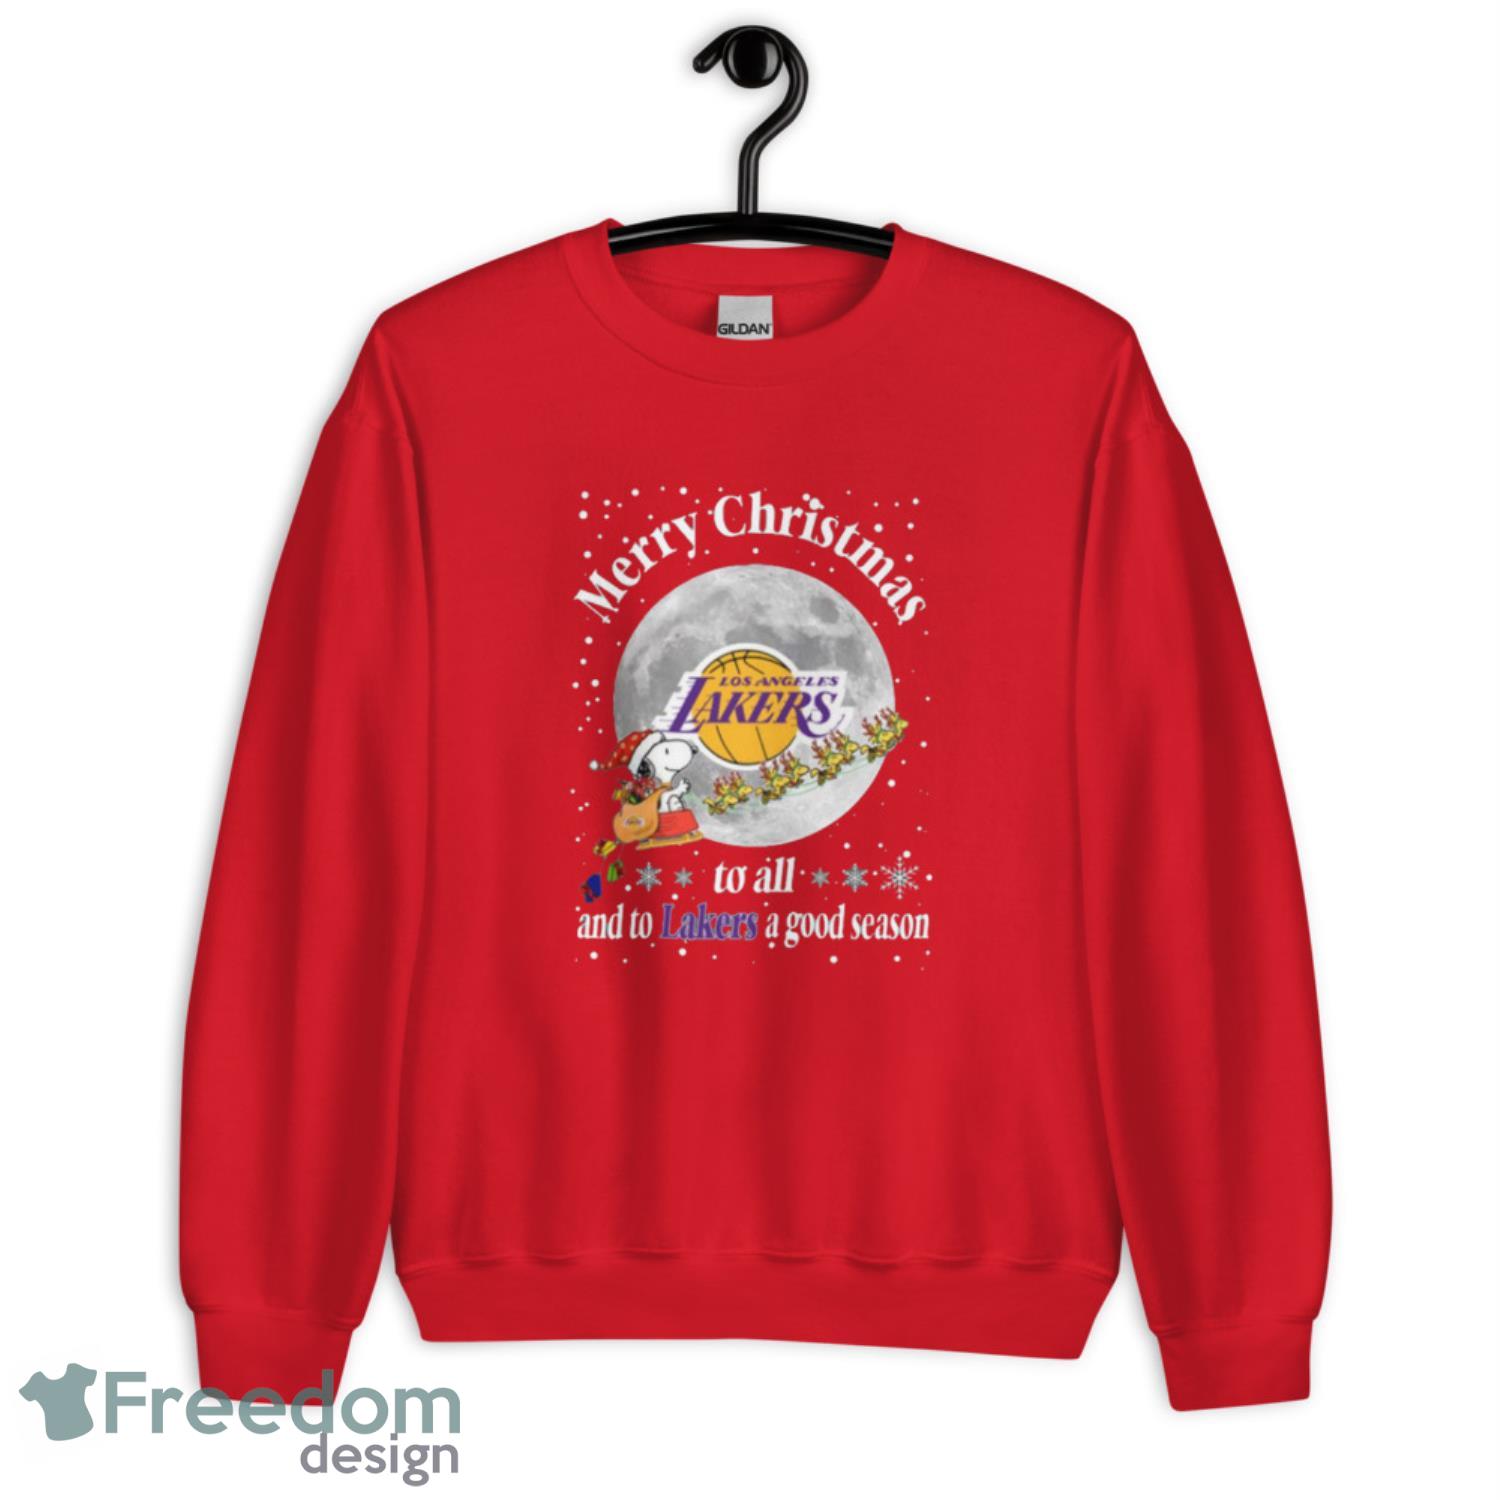 Los Angeles Lakers Merry Christmas To All And To Lakers A Good Season NBA Basketball Sports T Shirt - G185 Unisex Heavy Blend Crewneck Sweatshirt-1